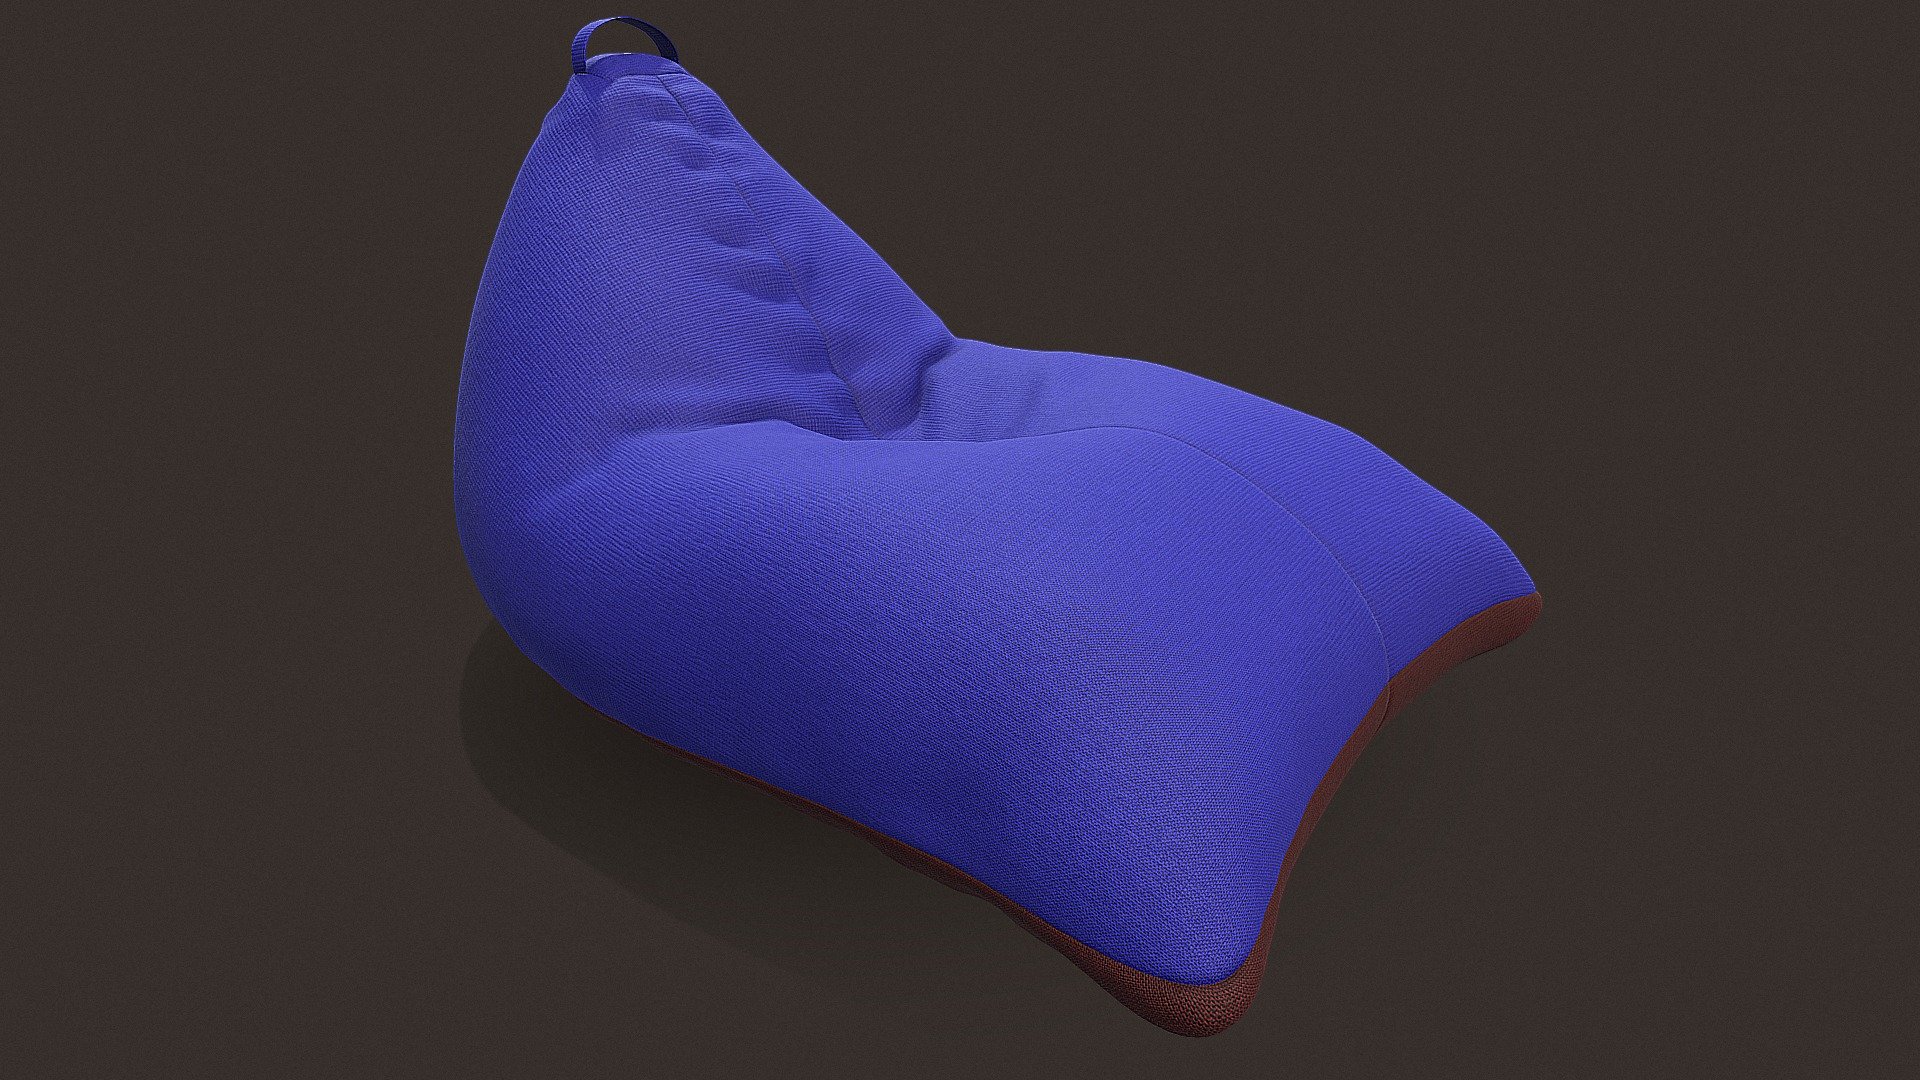 Bean Bag is a model that will enhance detail and realism to any of your rendering projects.
The model has a fully textured, detailed design that allows for close-up renders, and was originally modeled in Blender 3.5, Textured in Substance Painter 2023 and rendered with Adobe Stagier Renders have no post-processing.

Features: 
-High-quality polygonal model, correctly scaled for an accurate representation of the original object. 
-The model’s resolutions are optimized for polygon efficiency. 
-The model is fully textured with all materials applied. 
-All textures and materials are included and mapped in every format. 
-No cleaning up necessary just drop your models into the scene and start rendering.
-No special plugin needed to open scene.

Measurements: Units: M

File Formats: Blender 3.5(Cycles) OBJ FBX

Textures Formats: 4k,. (message me for a custom size ex 1k,2k,8k)
If you need a custom label don’t hesitate to contact me through support 3d model